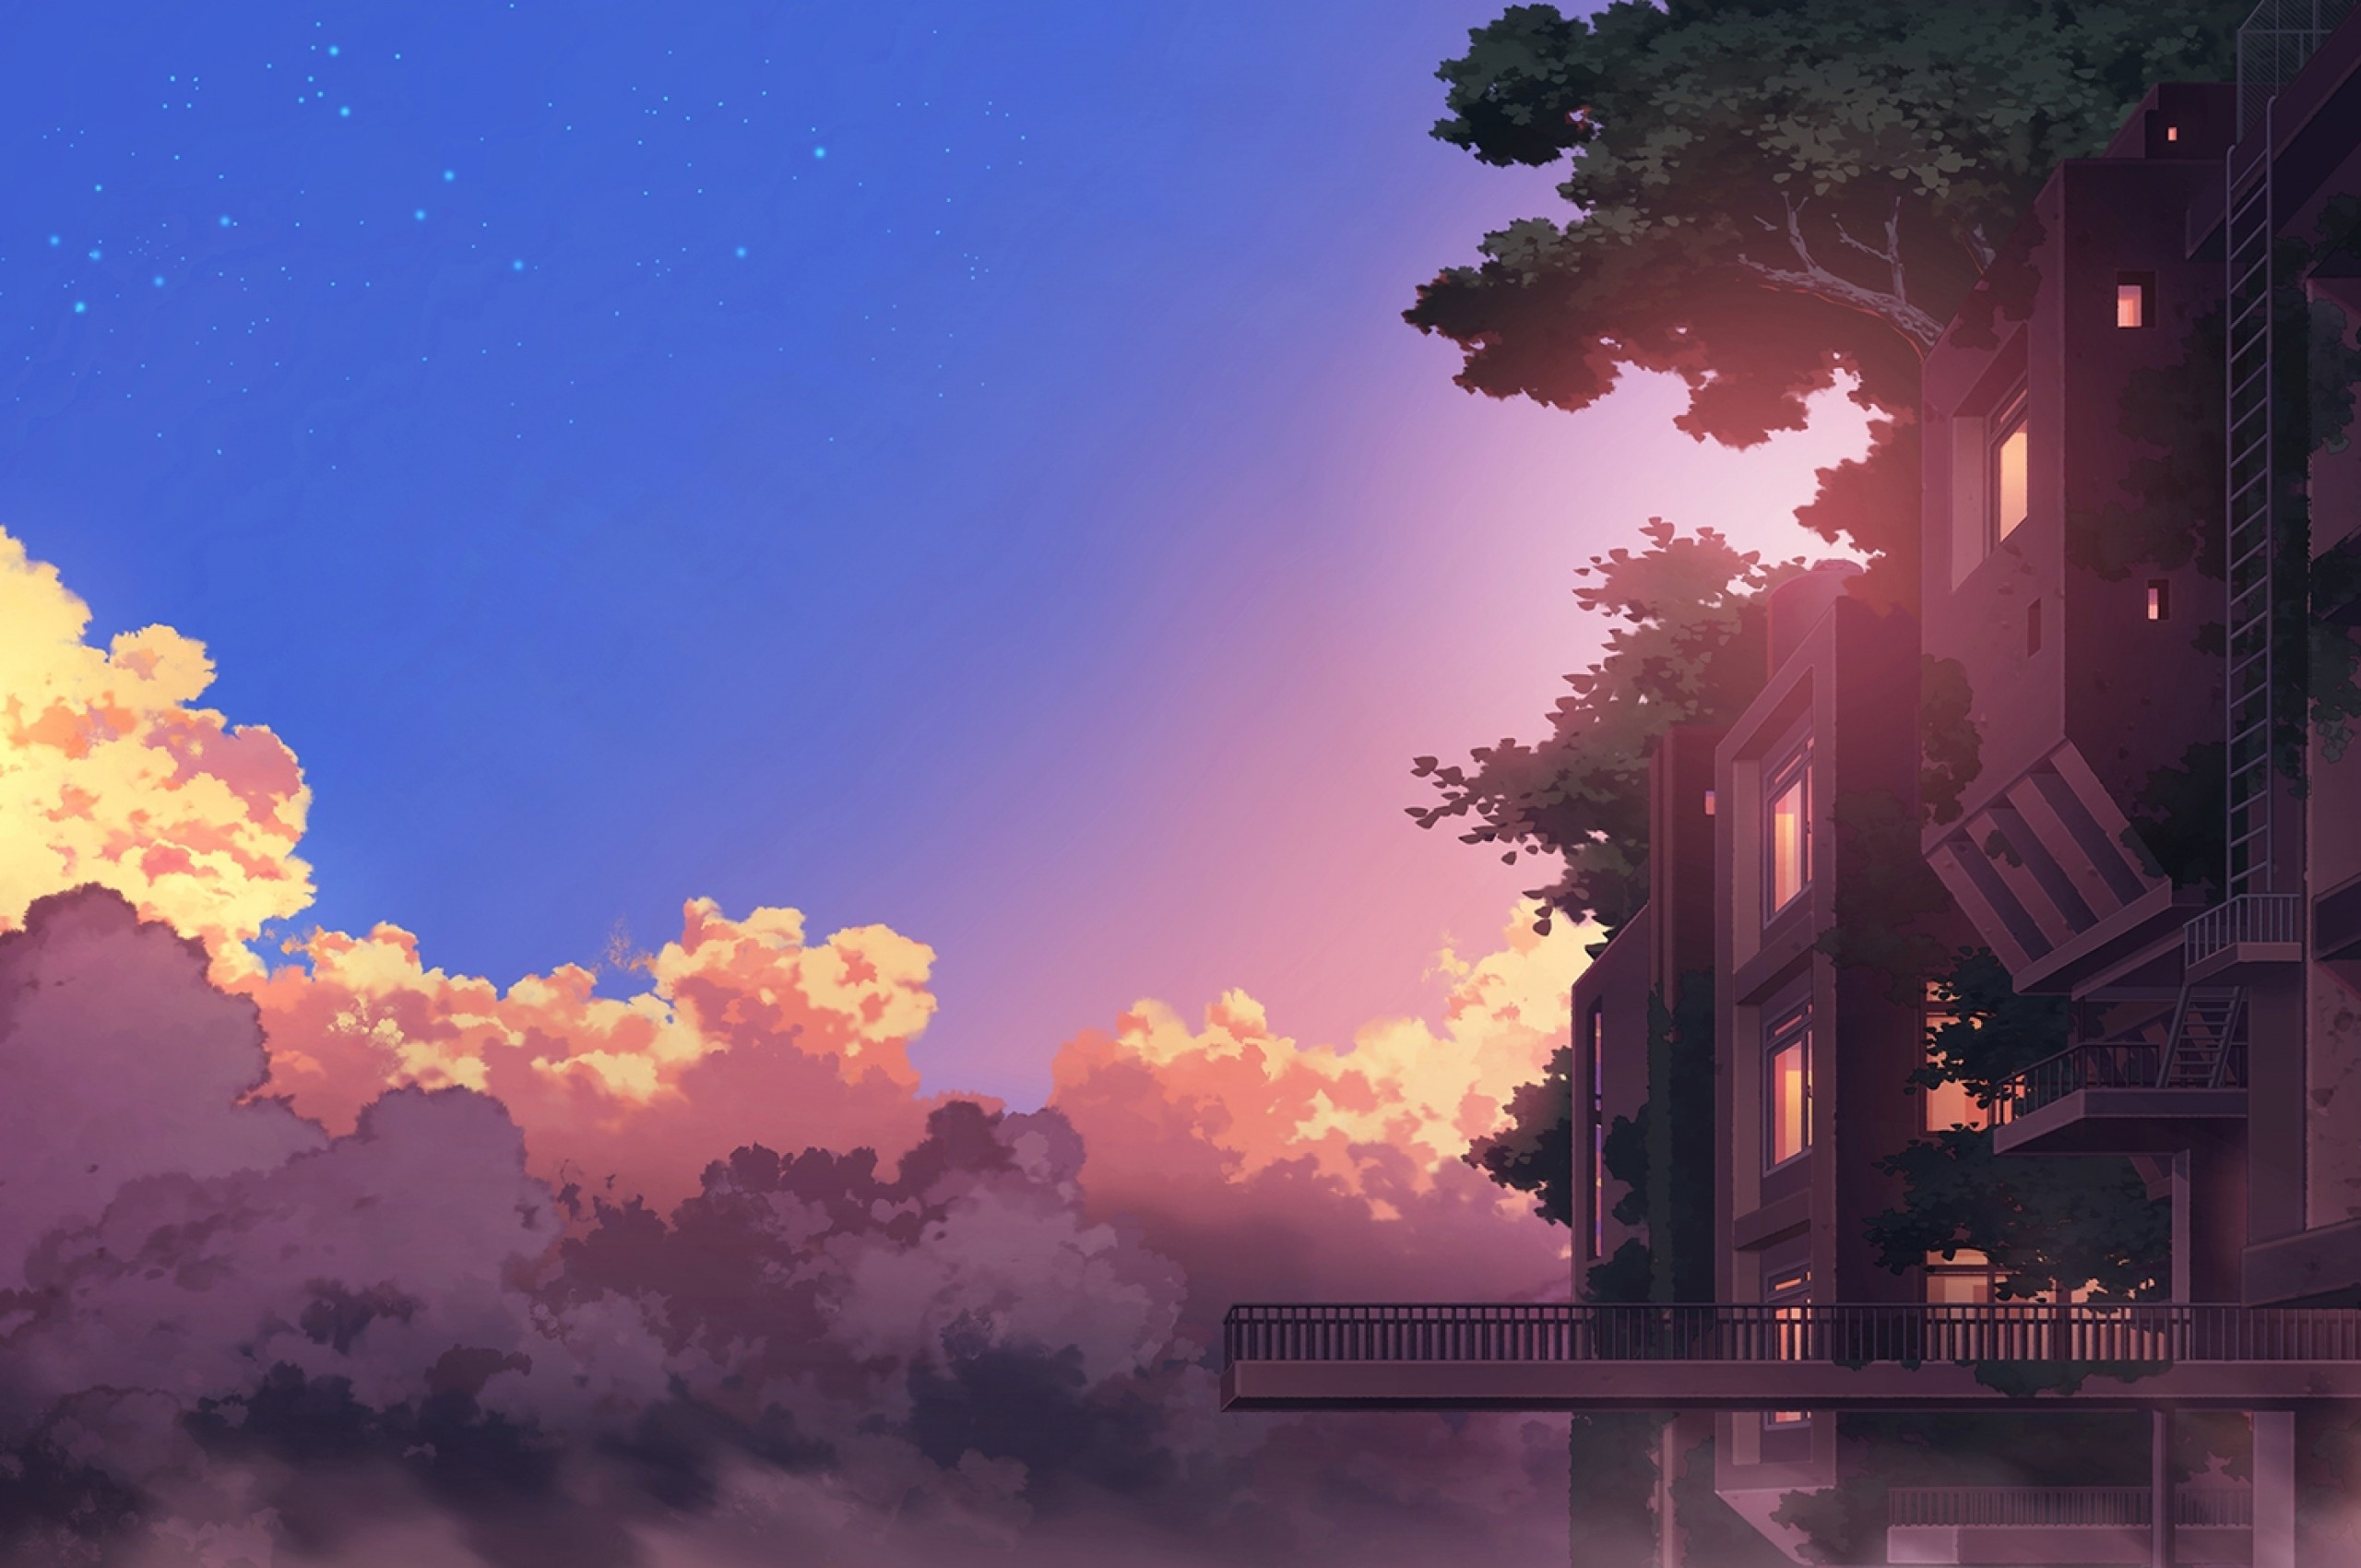 Download 2560x1700 Anime Landscape, Building, Sunset, Clouds, Scenic Wallpaper for Chromebook Pixel